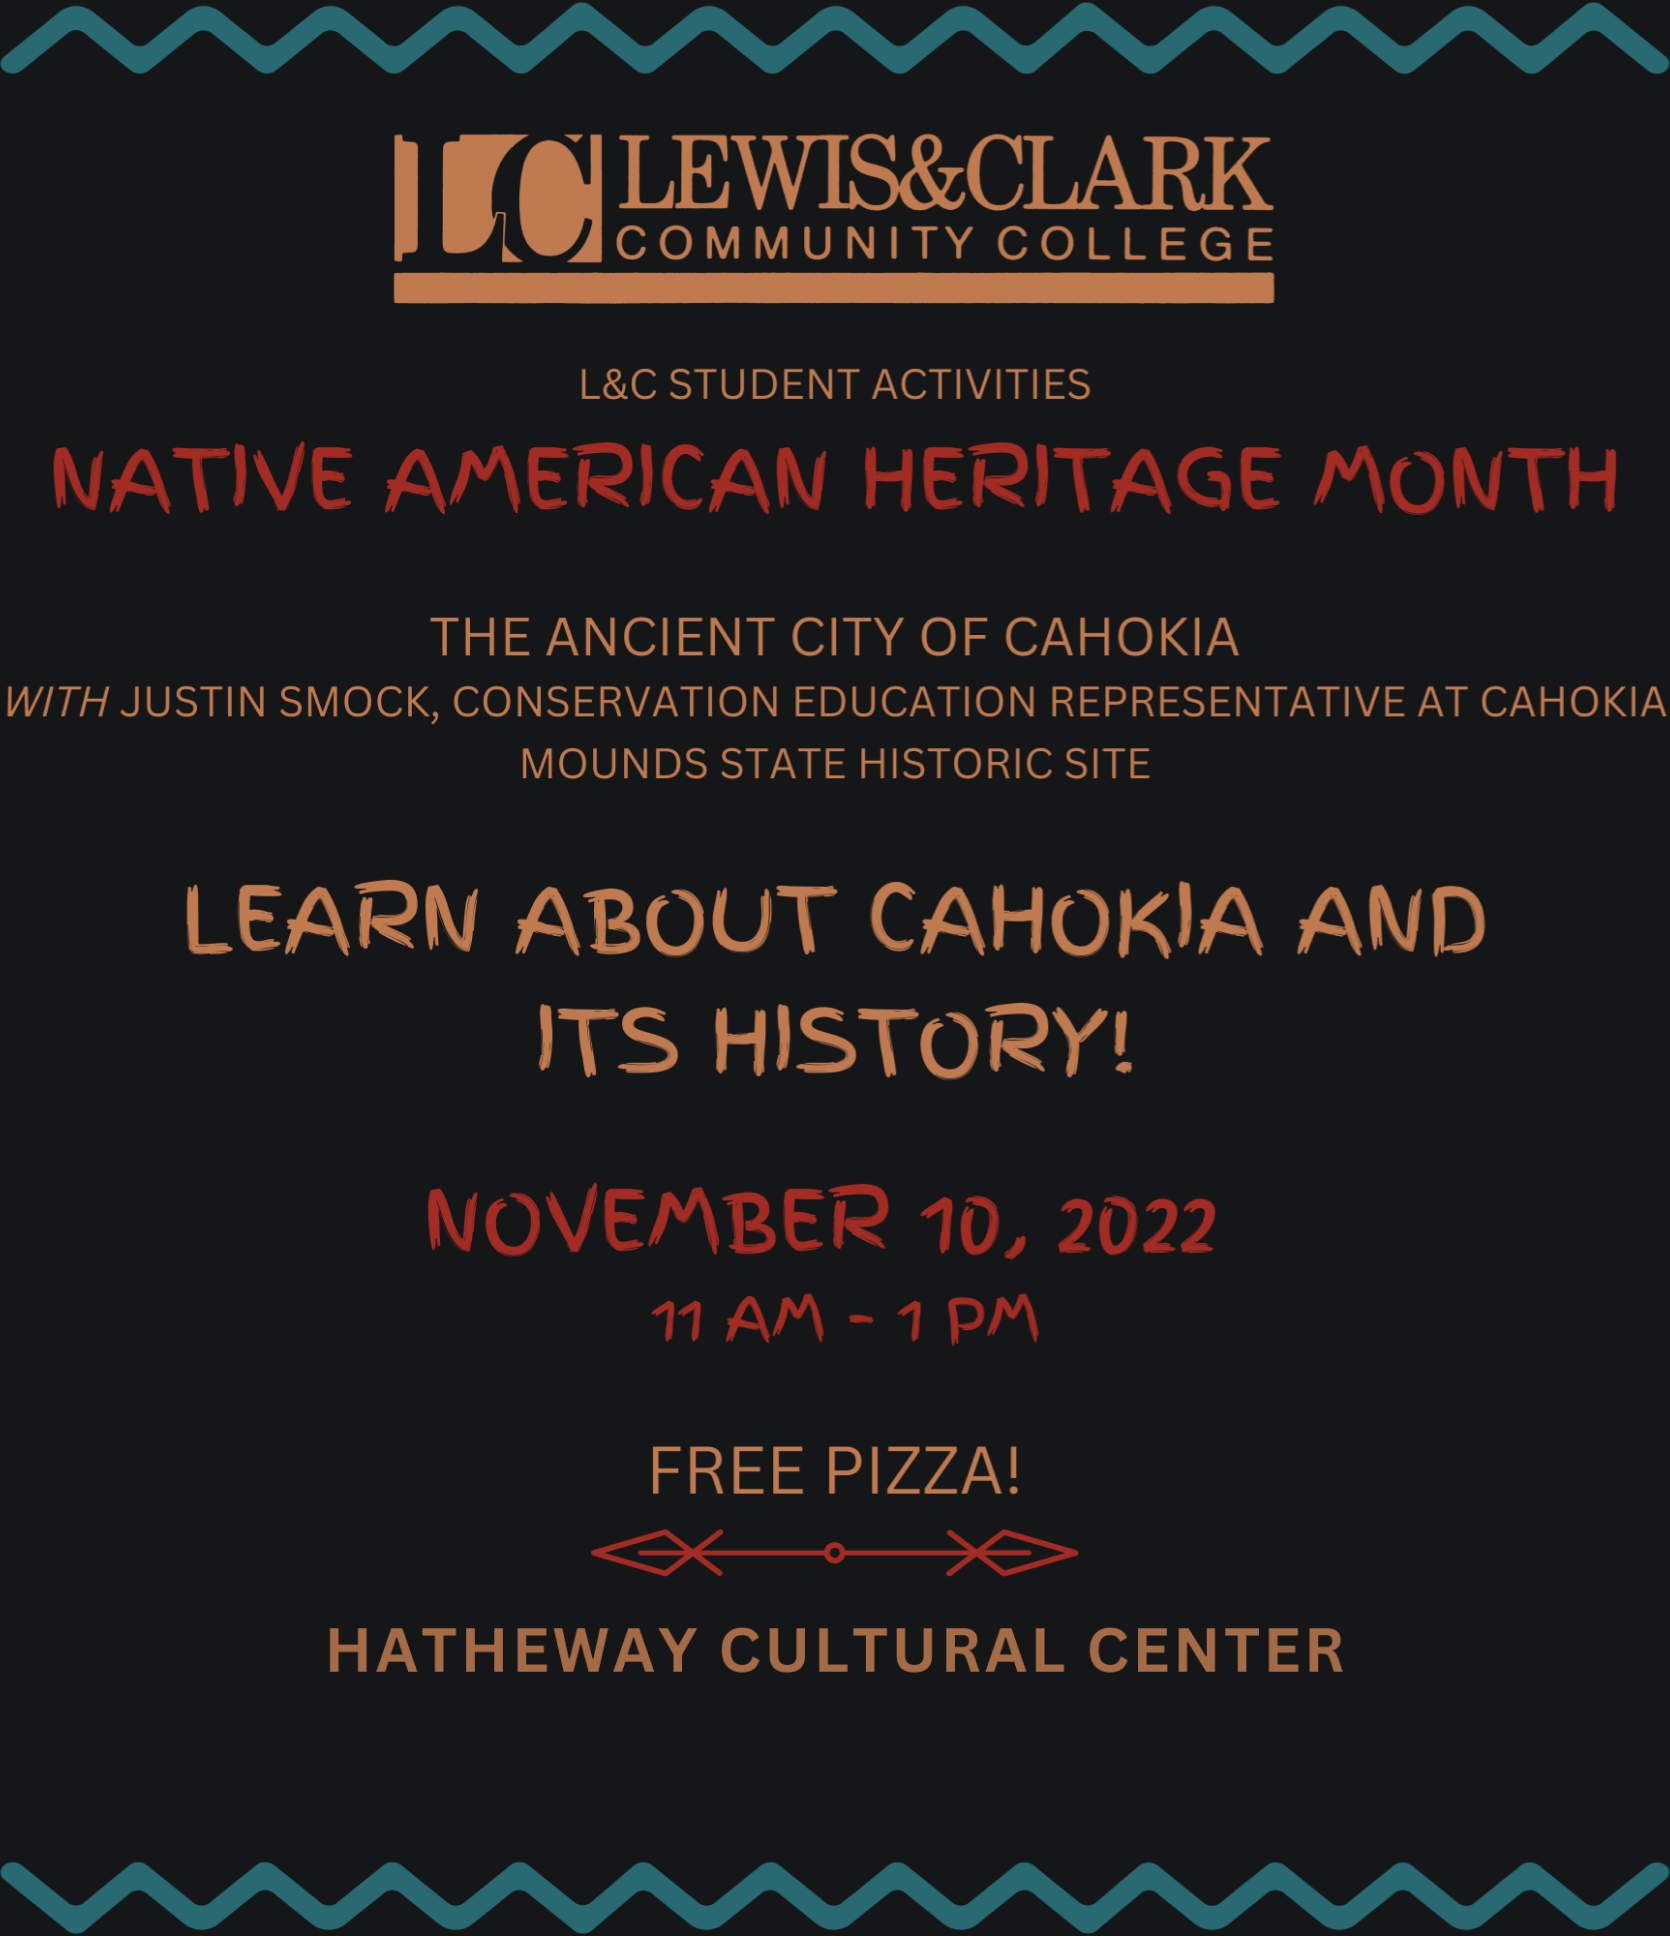 Native American Heritage Month Poster